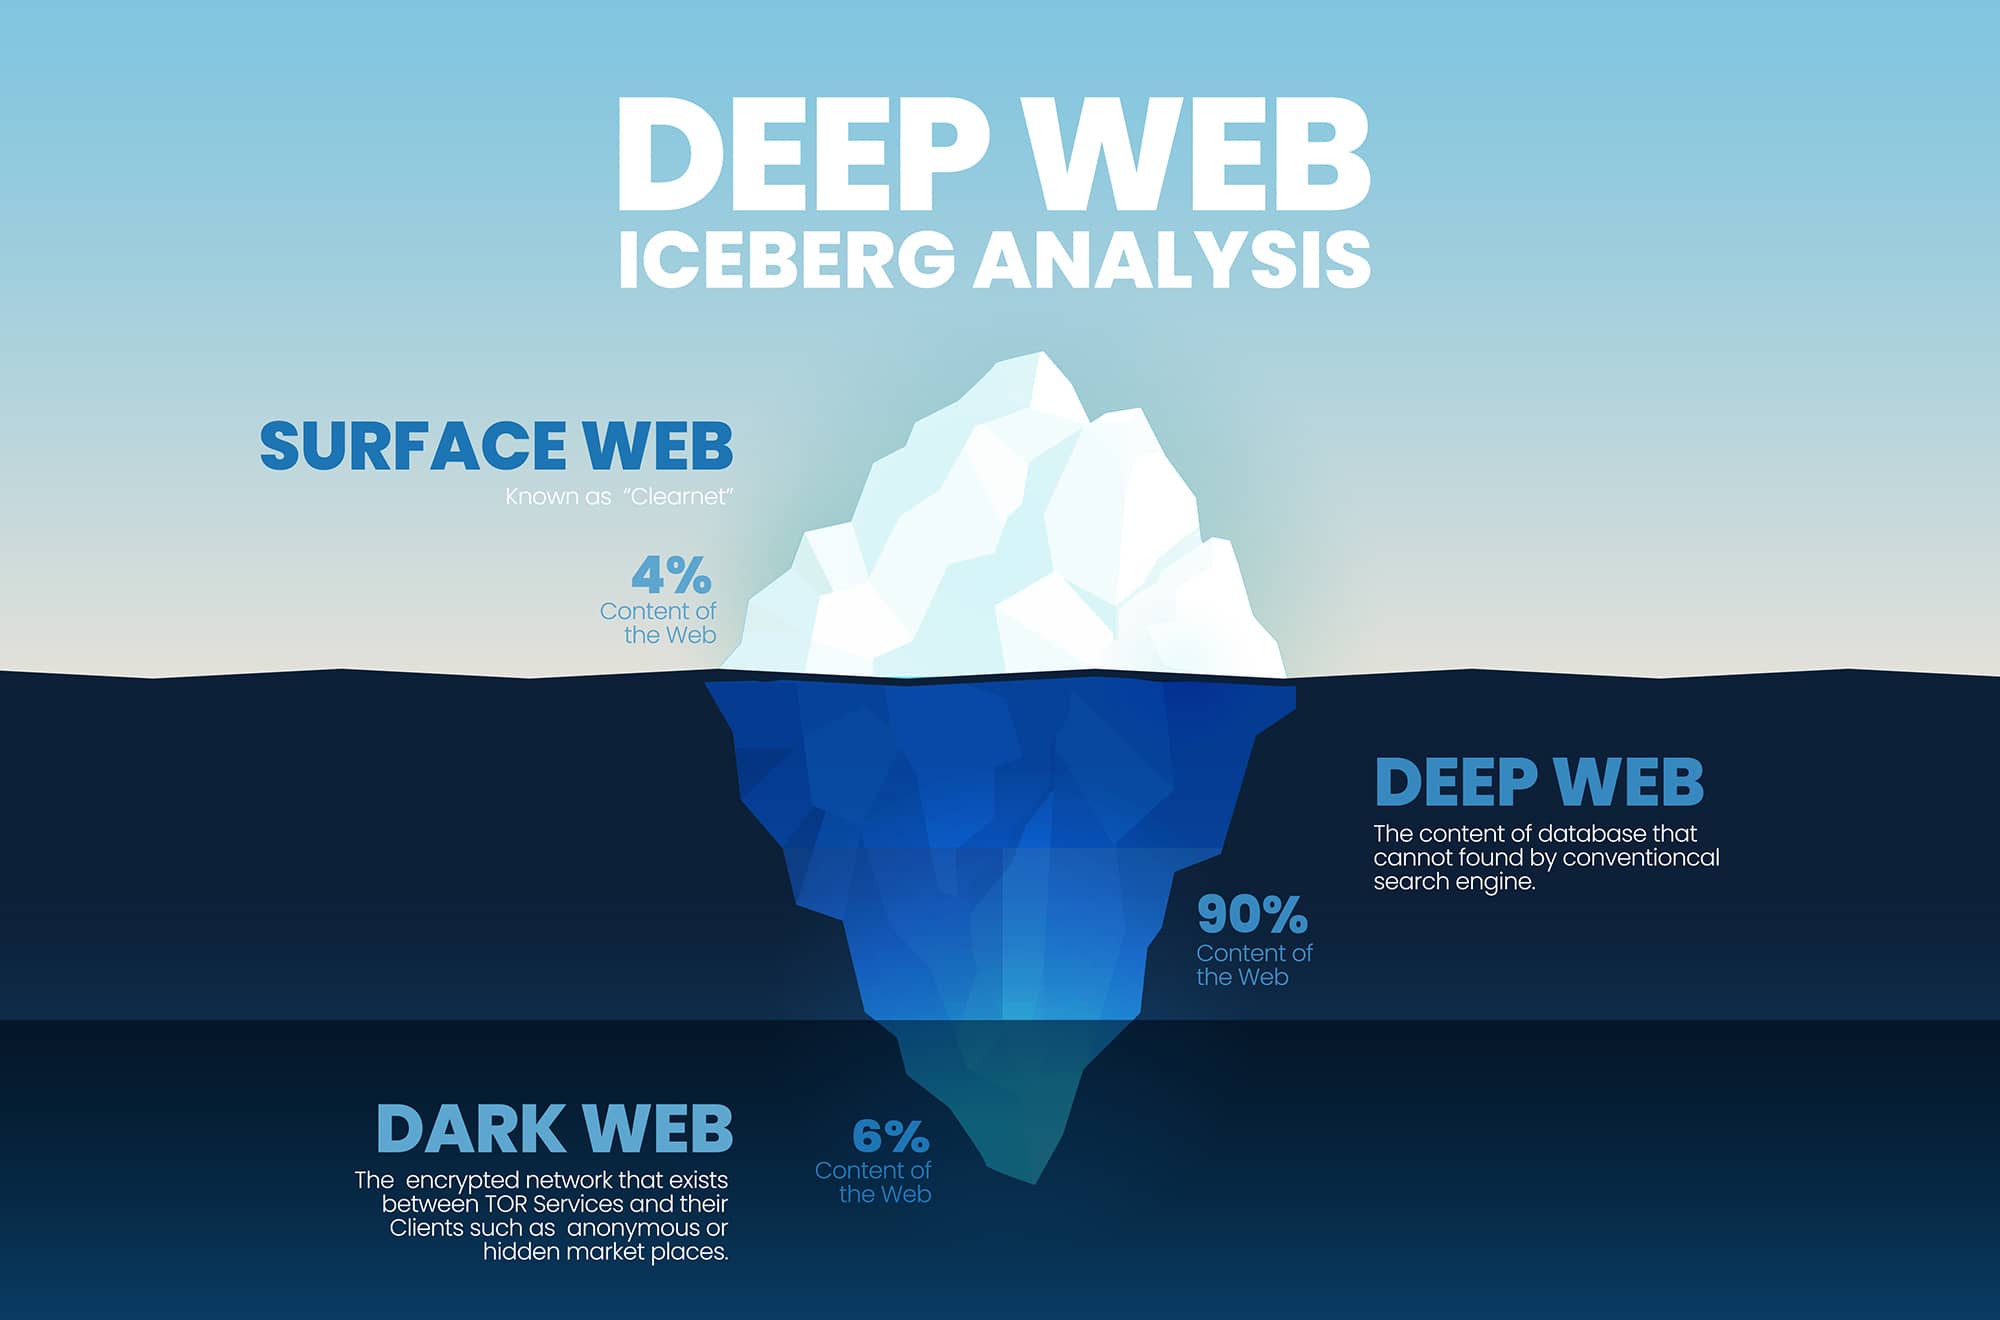 The dark web is an anonymous Internet layer hidden from traditional search engines and browsers. Visitors may only access it through specialized tools, such as Tor or I2P, which allow all activity to remain untraceable. It offers a sense of privacy for its users by allowing them to access the web anonymously, with their IP addresses hidden from servers. The dark web houses various activities, including legitimate trade, illegal transactions, and access to censored material. While it is shrouded in mystery to many and often associated with nefarious activities, many journalists and political dissidents rely on the anonymity the dark web provides when trying to protect their identities online. Although there can be both beneficial and troubling dimensions to this tier of the Internet, it is highly advisable to stay away from the dark web because of the dangerous security risks associated with its virtual landscape.